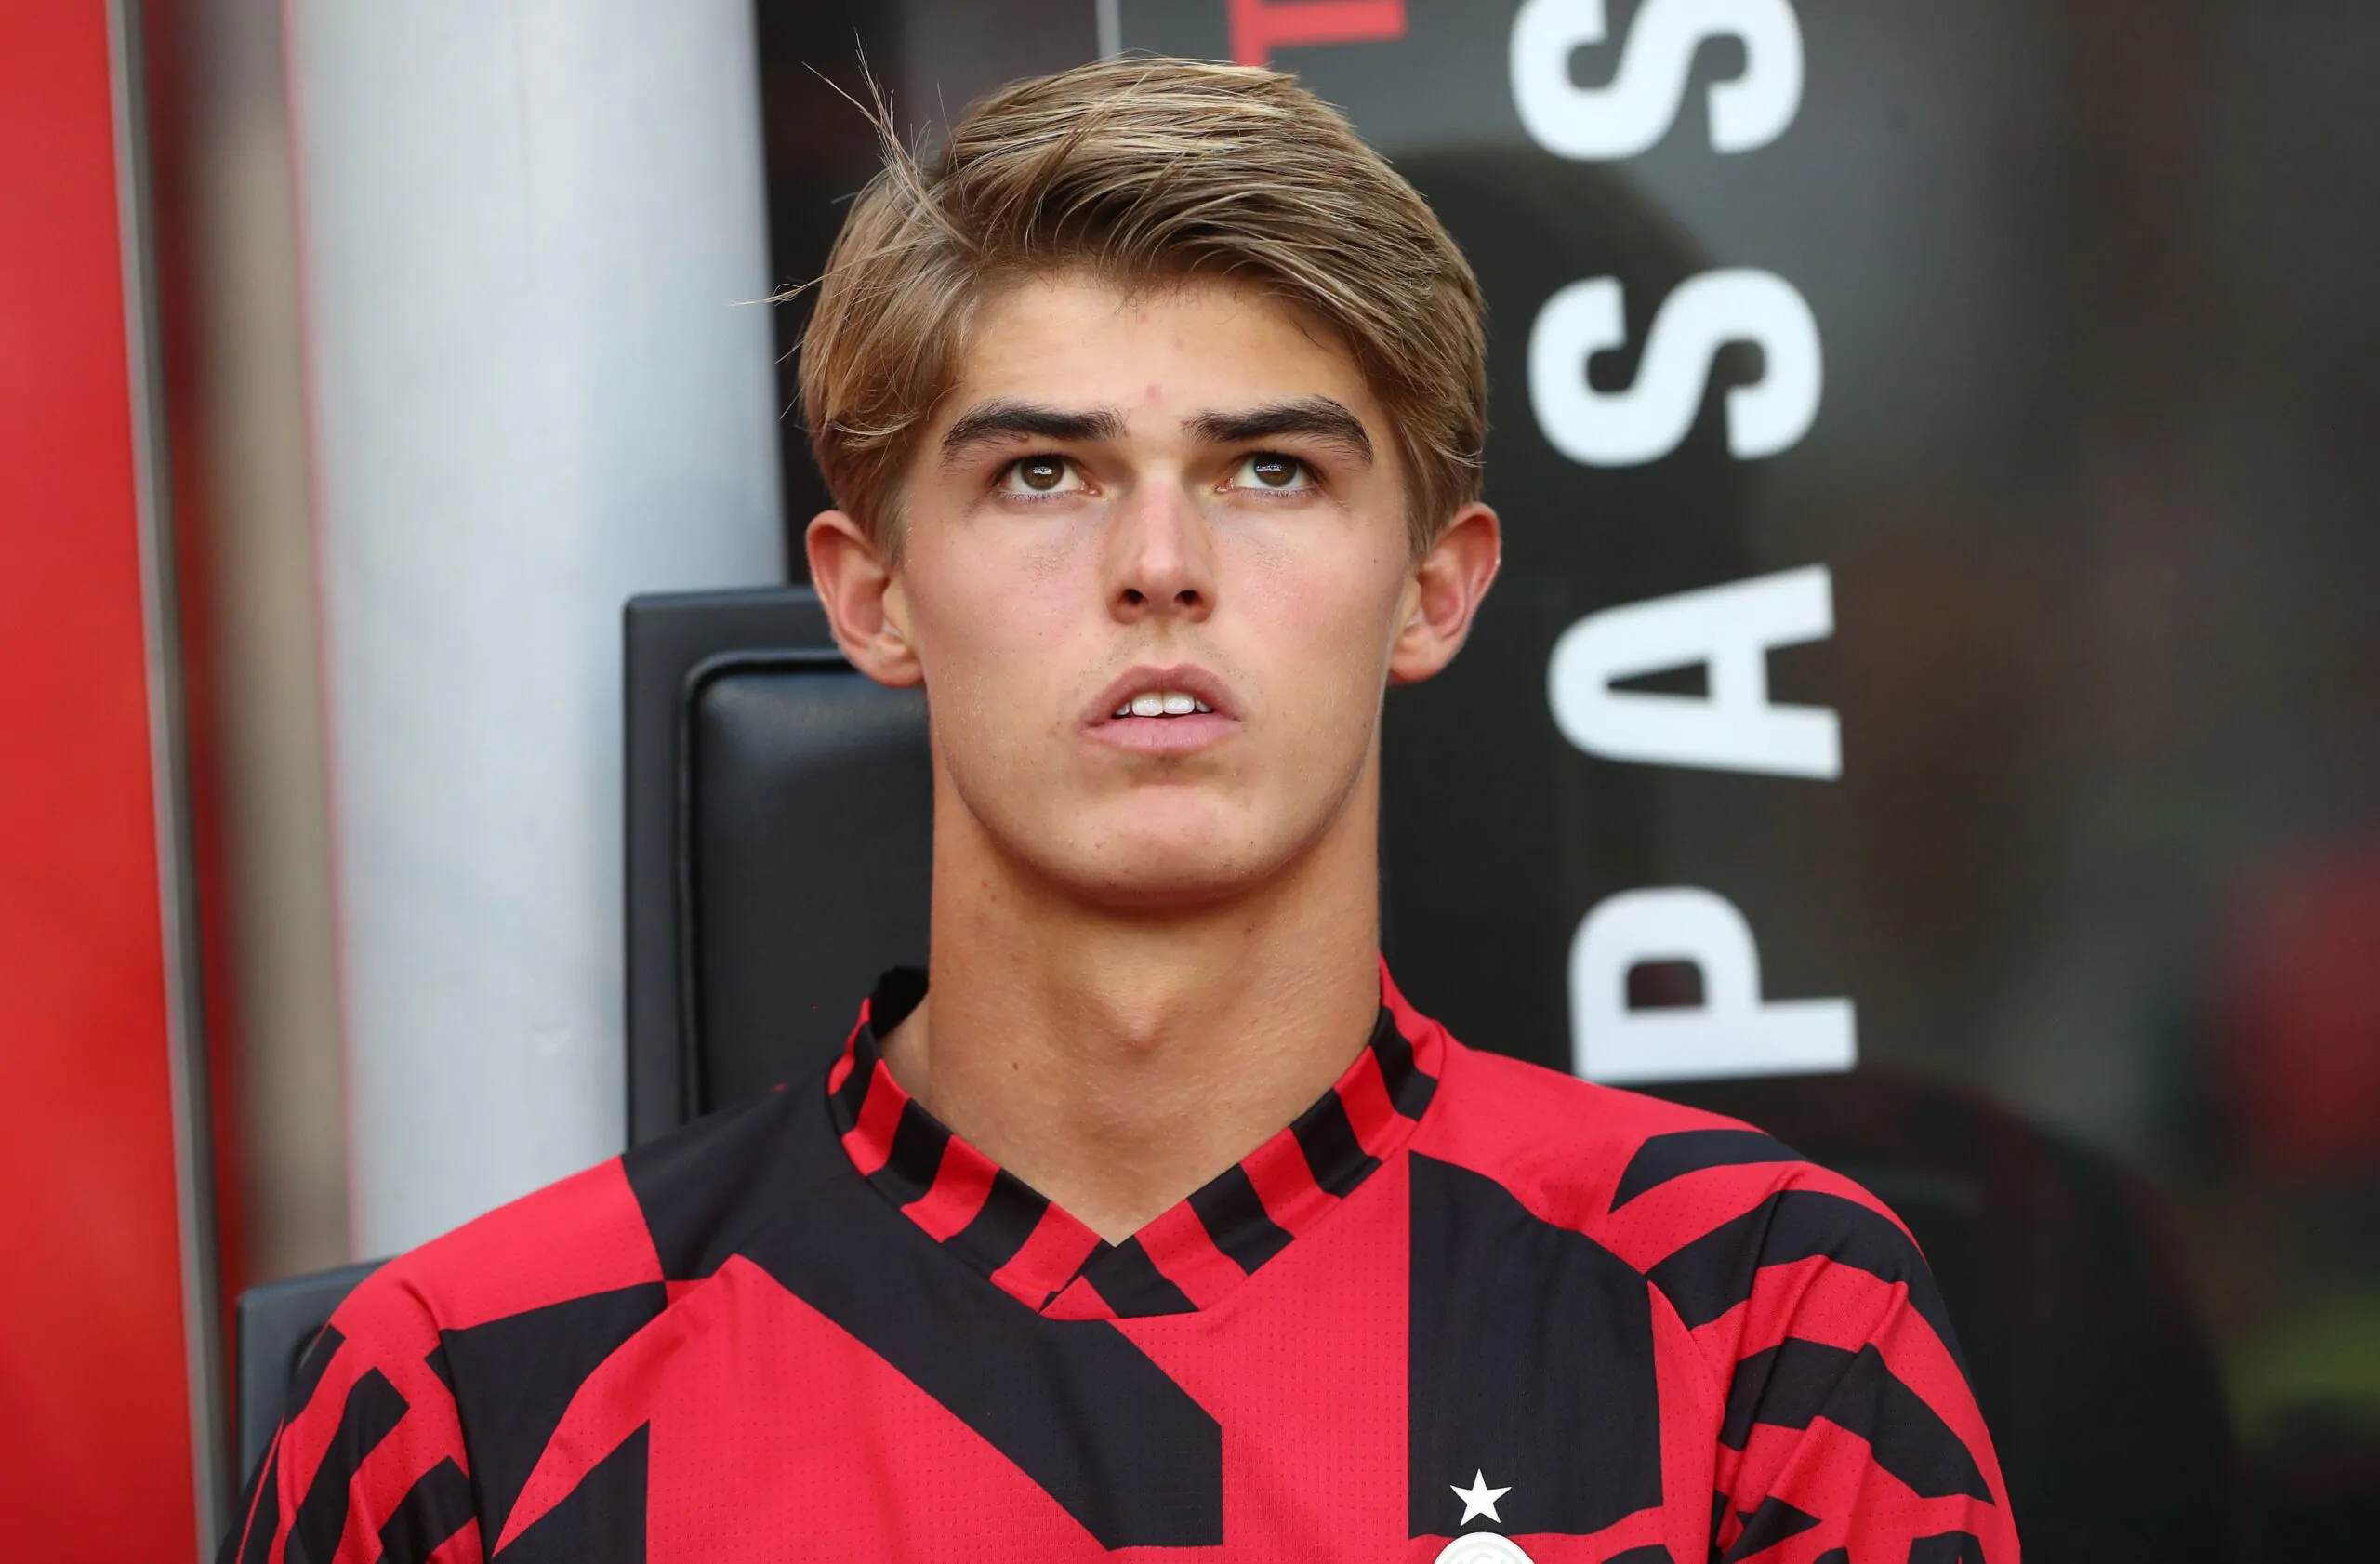 Milan aren’t currently considering moving on from Charles De Ketelaere after a disappointing season, even though they are working to bolster the position.